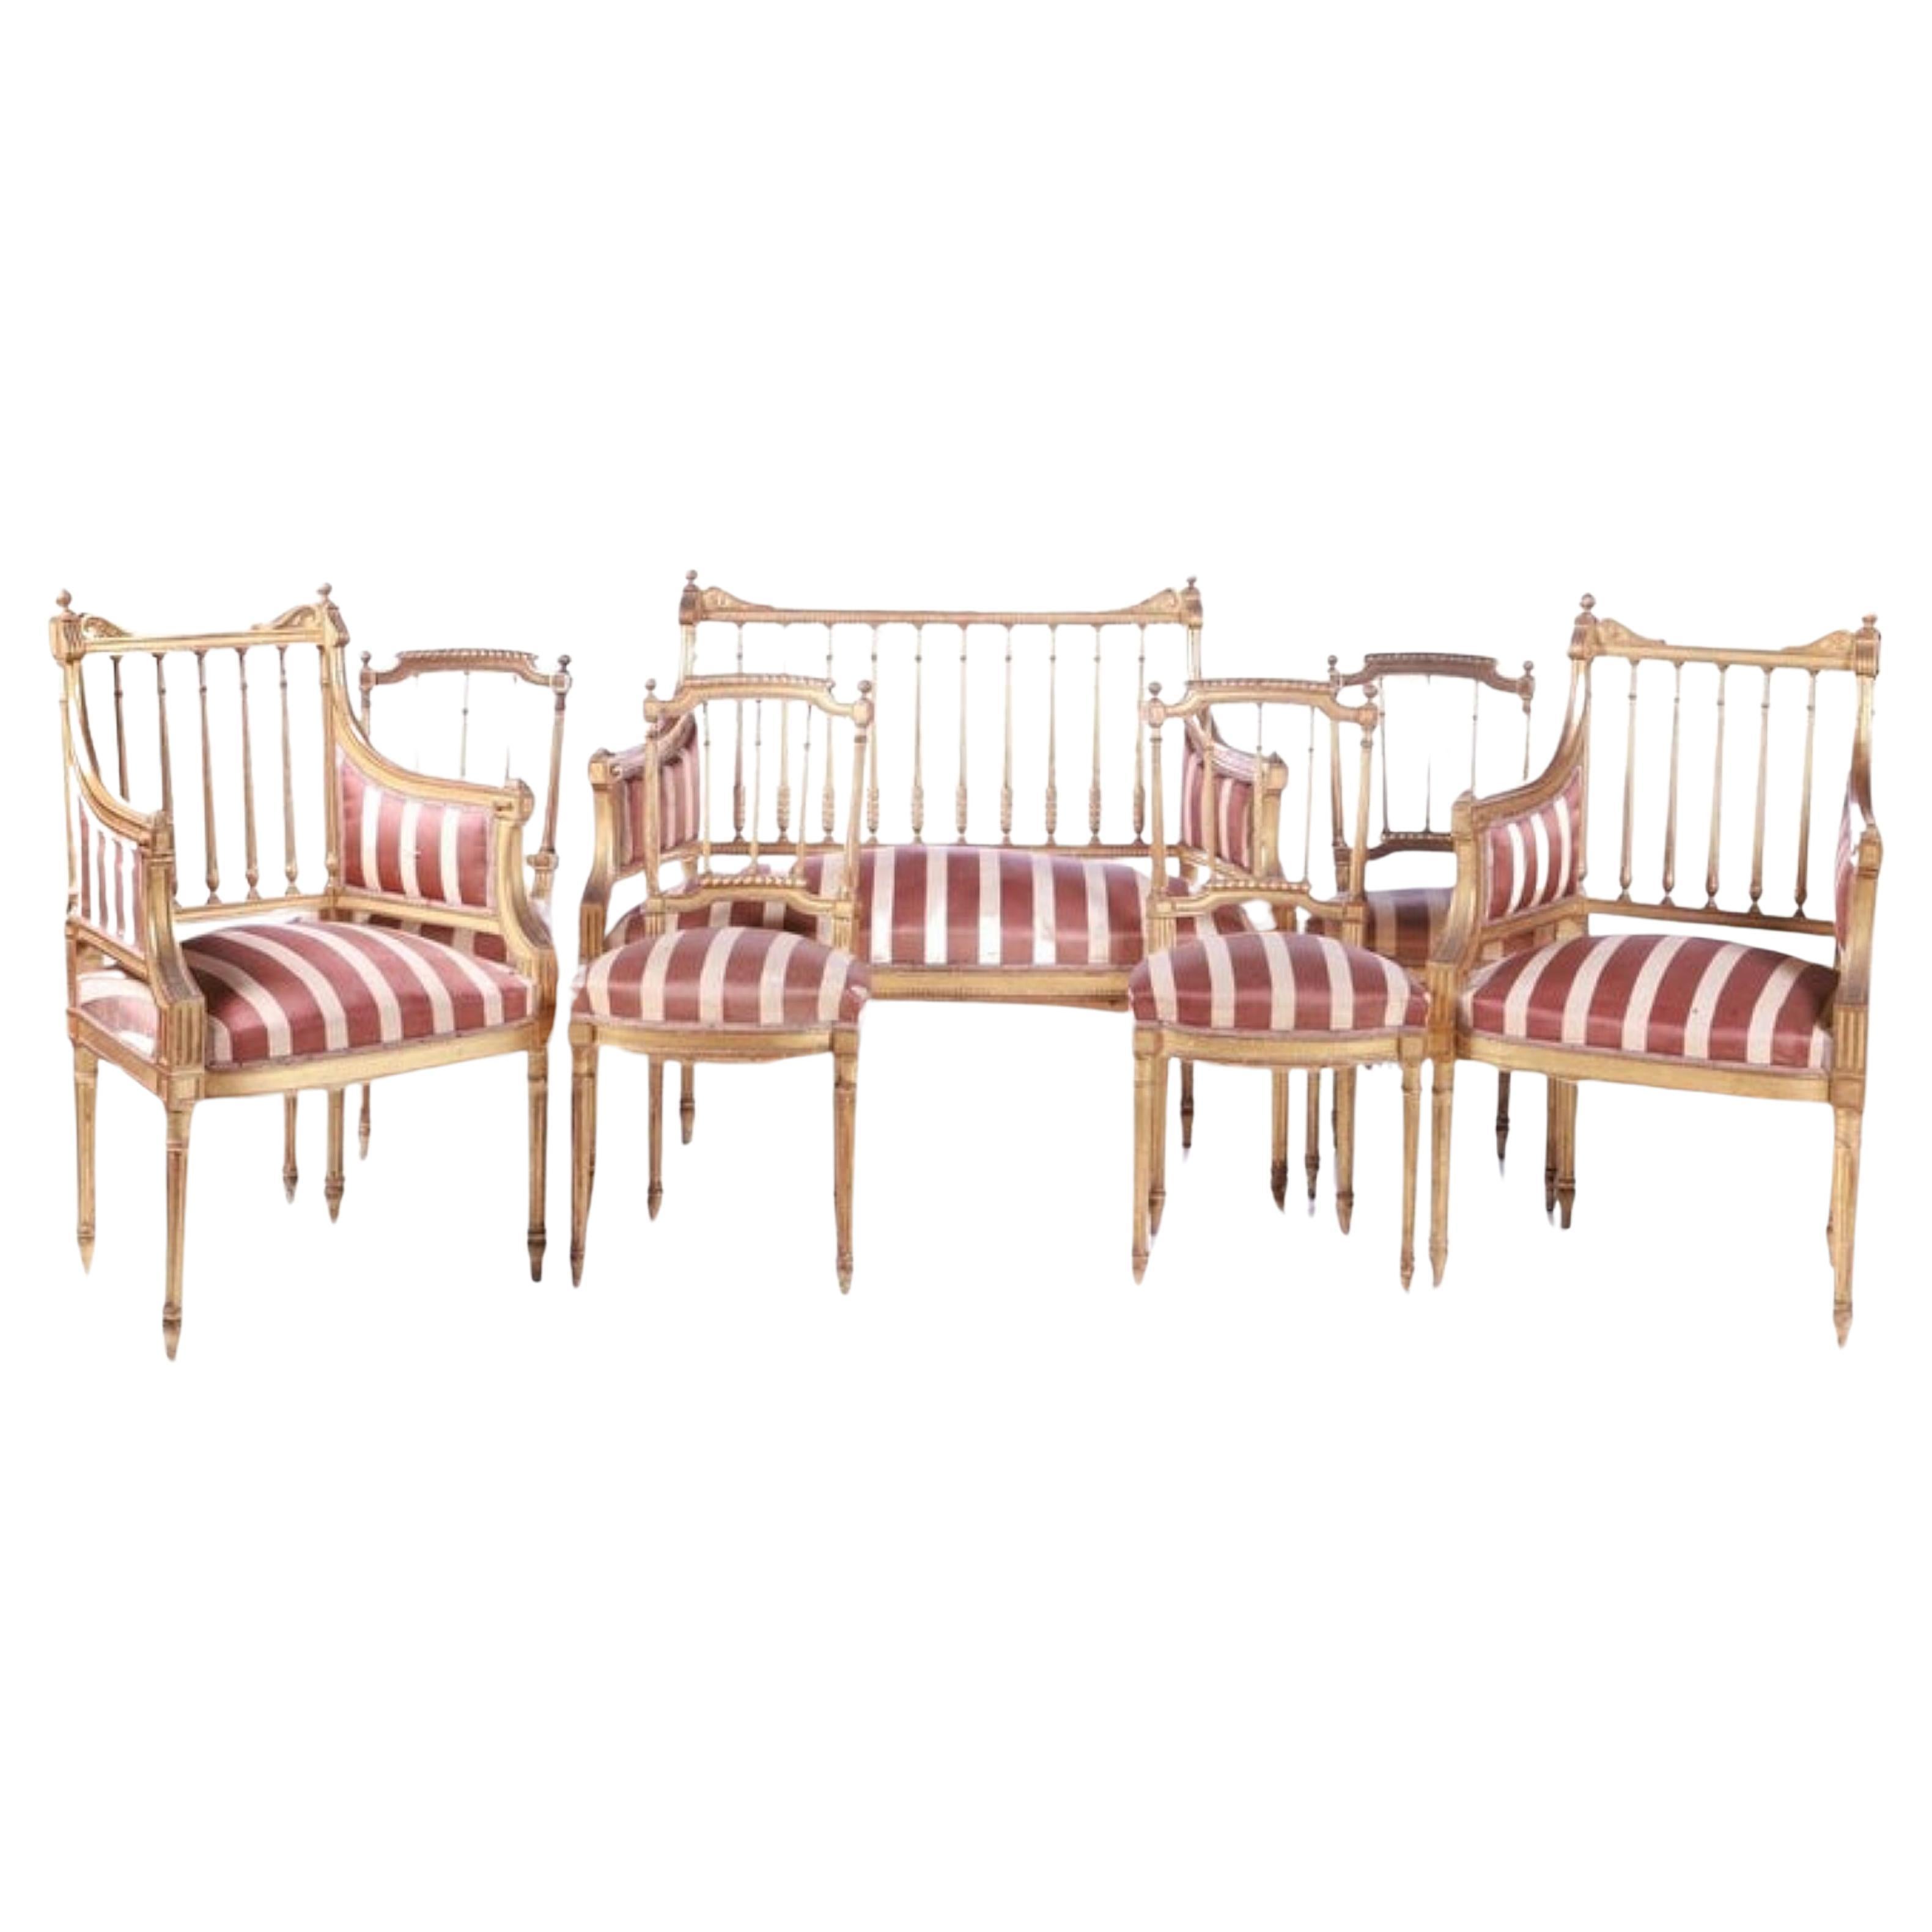 French Canape Set, 4 Chairs and 2 Armchairs Late 19th Century Early 20th Century For Sale